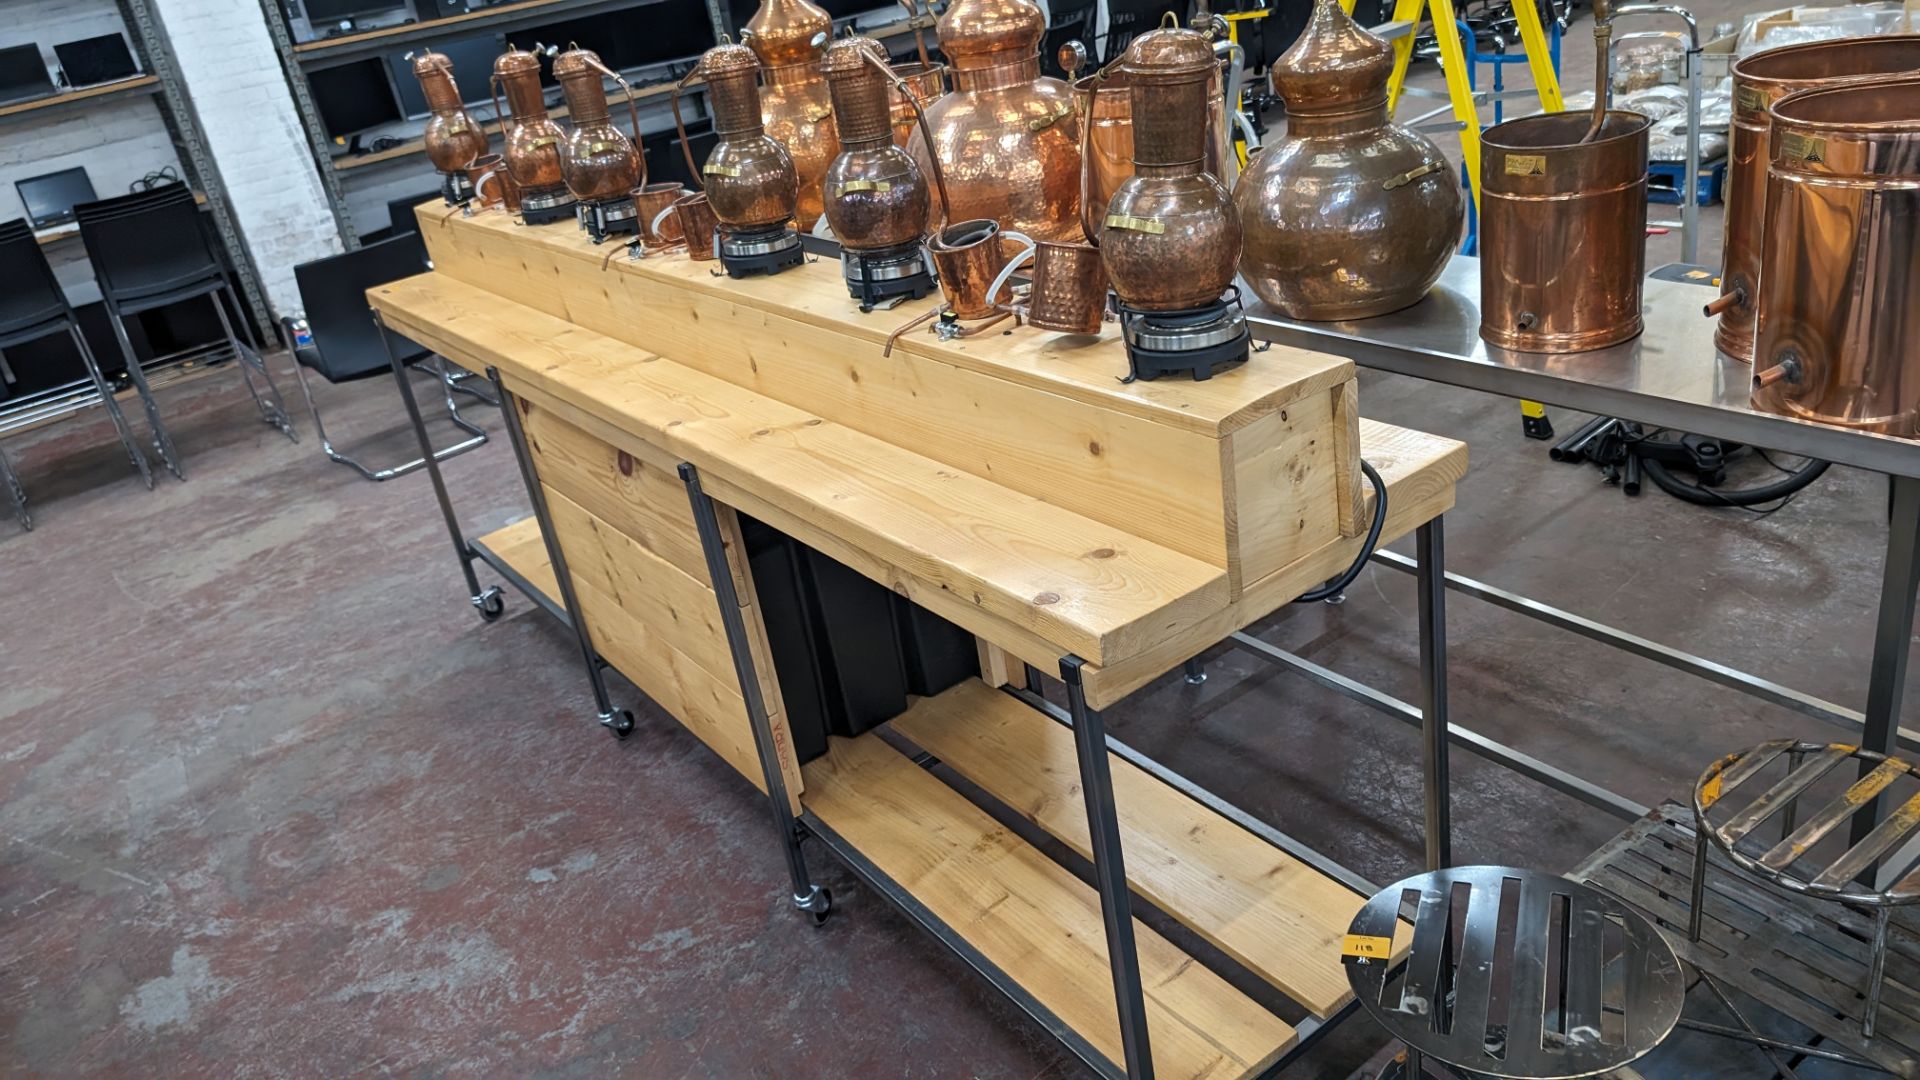 6 off small stills plus mobile bench. This lot comprises a custom made mobile bench with a metal fr - Image 2 of 18